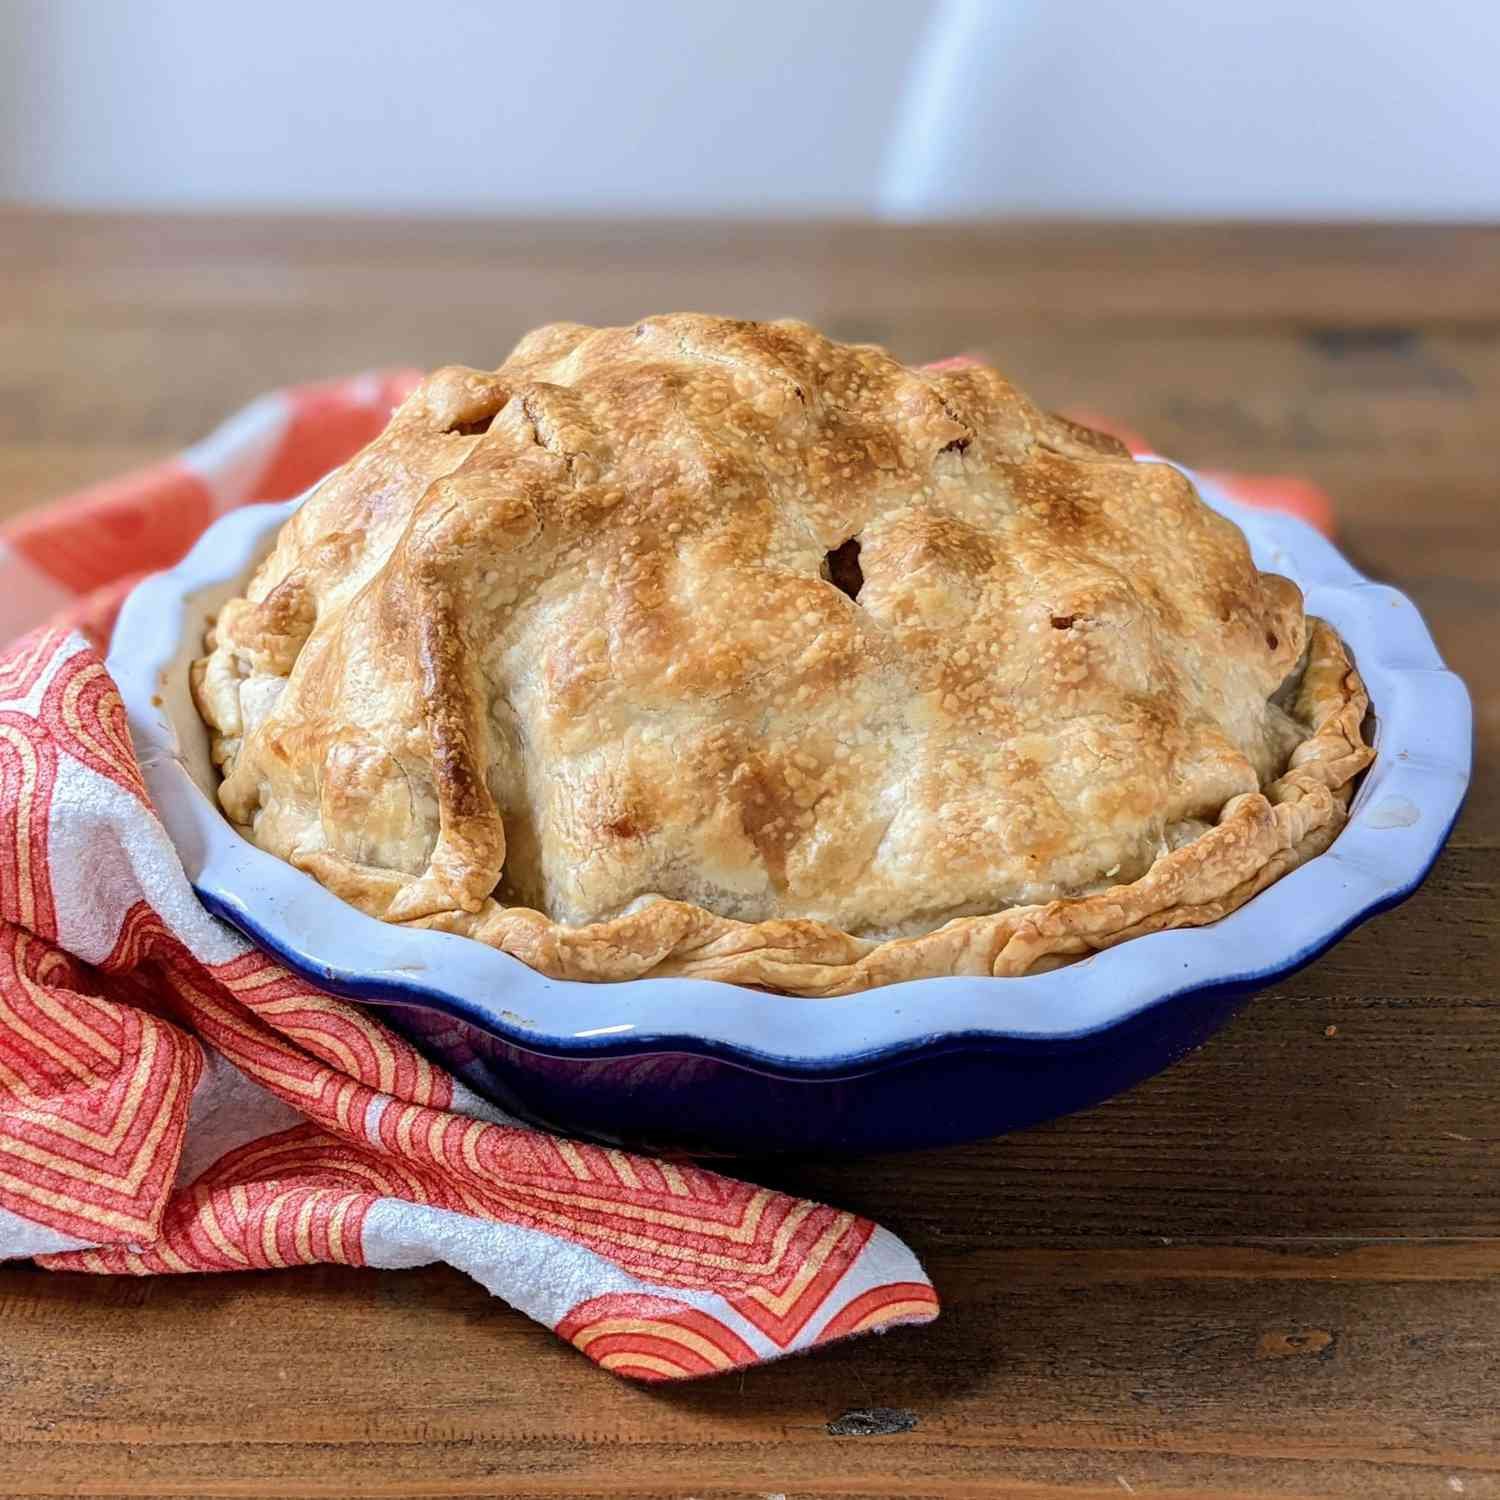 The Best Apples for Apple Pie and Apple Crisp